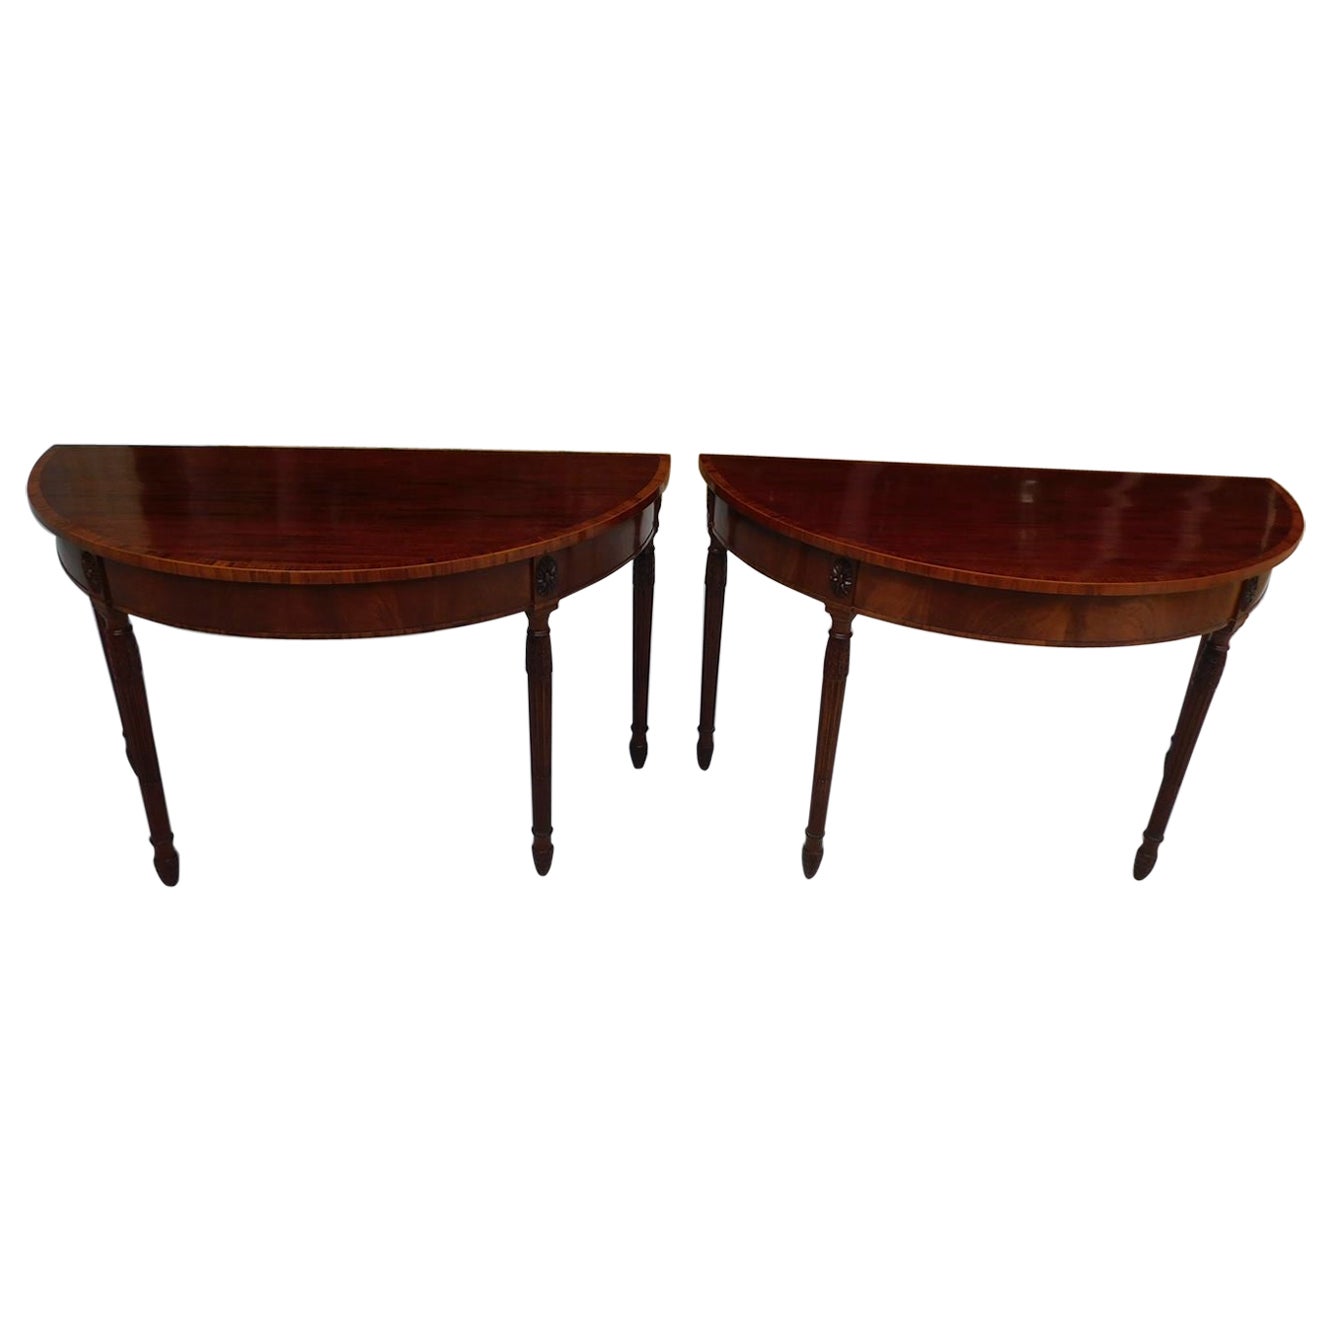 Pair of English Mahogany Demi-lune Consoles w/ Tulip Wood Cross Banding, C. 1780 For Sale